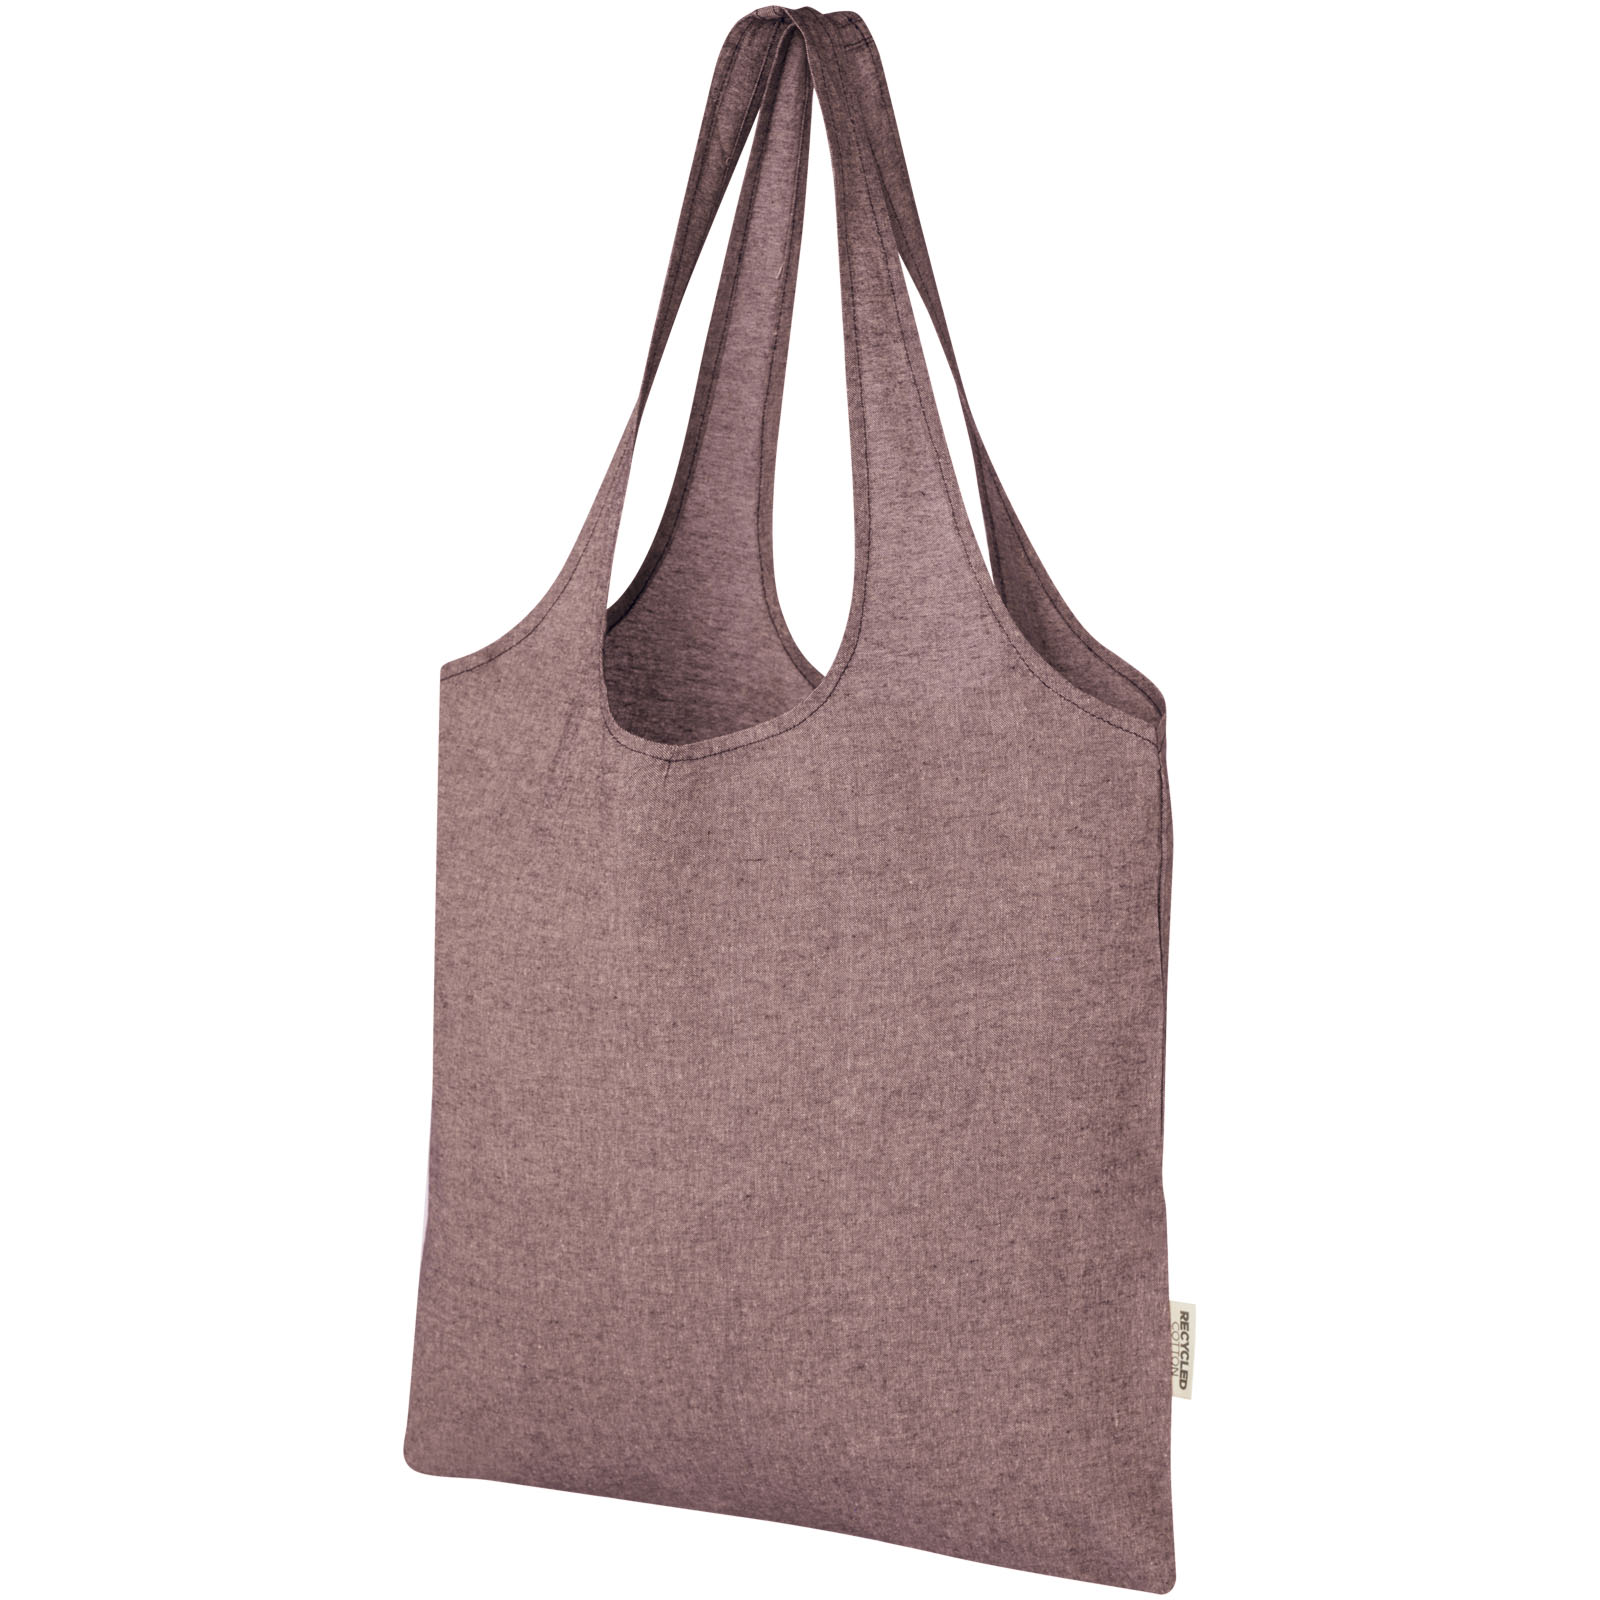 Bags - Pheebs 150 g/m² recycled cotton trendy tote bag 7L